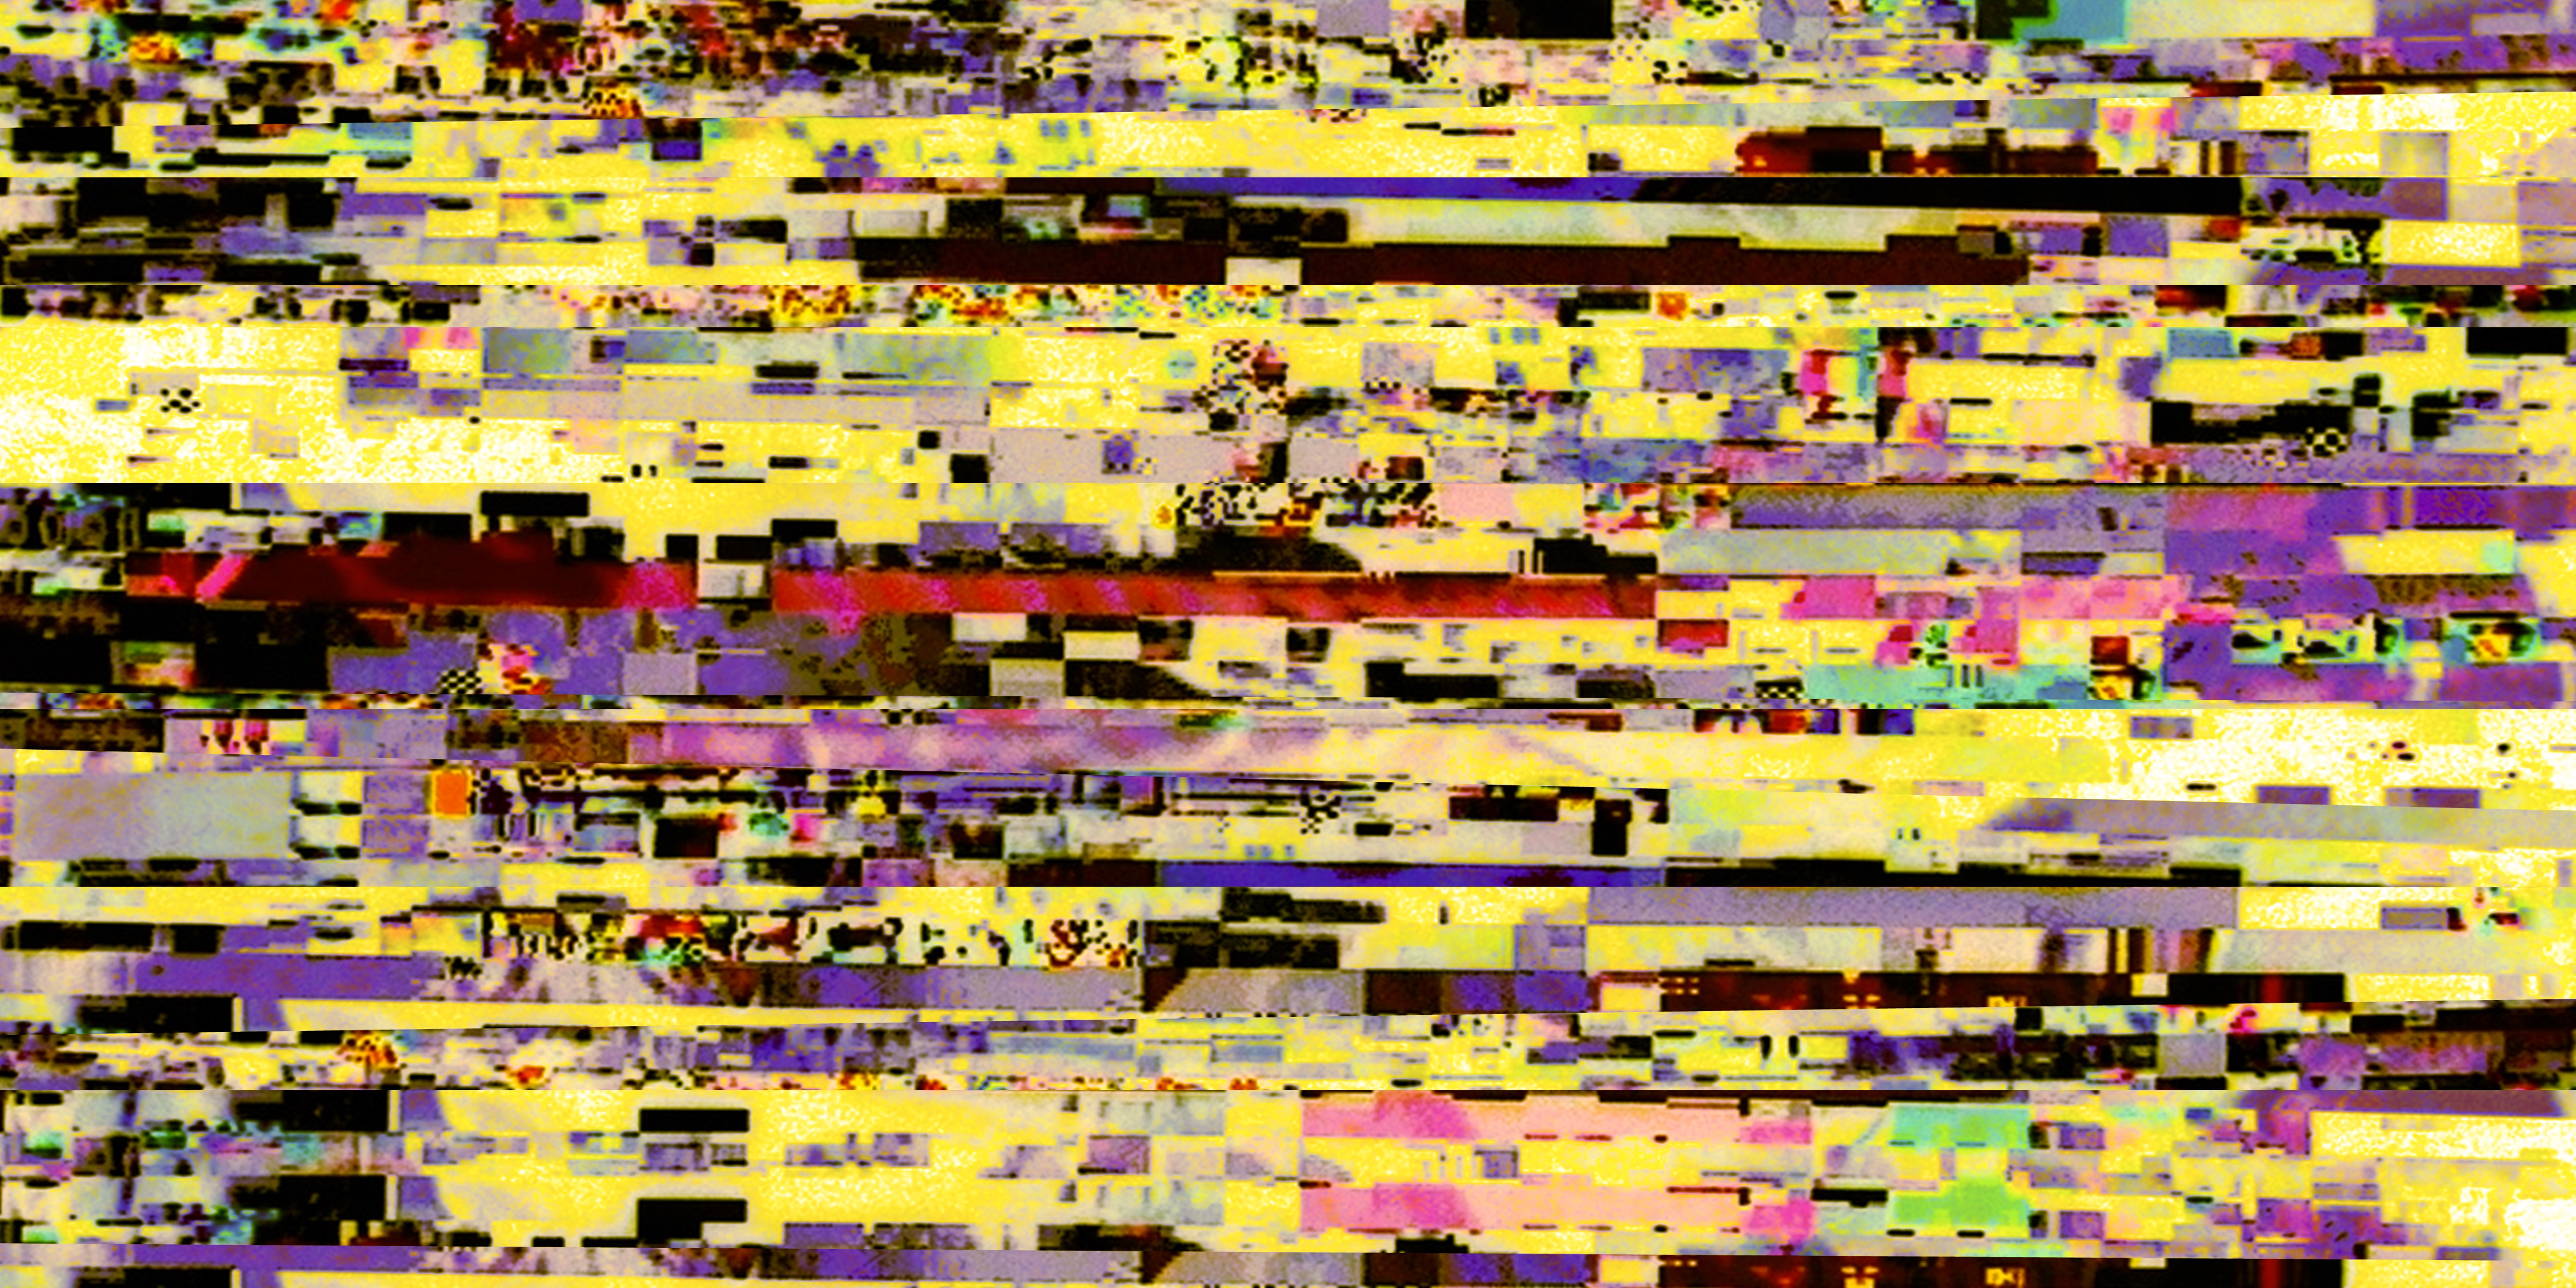 beautiful_works_crypto_glitch_for_above_your_couch_3_180_90_april_2018_KOMPRIMIERT